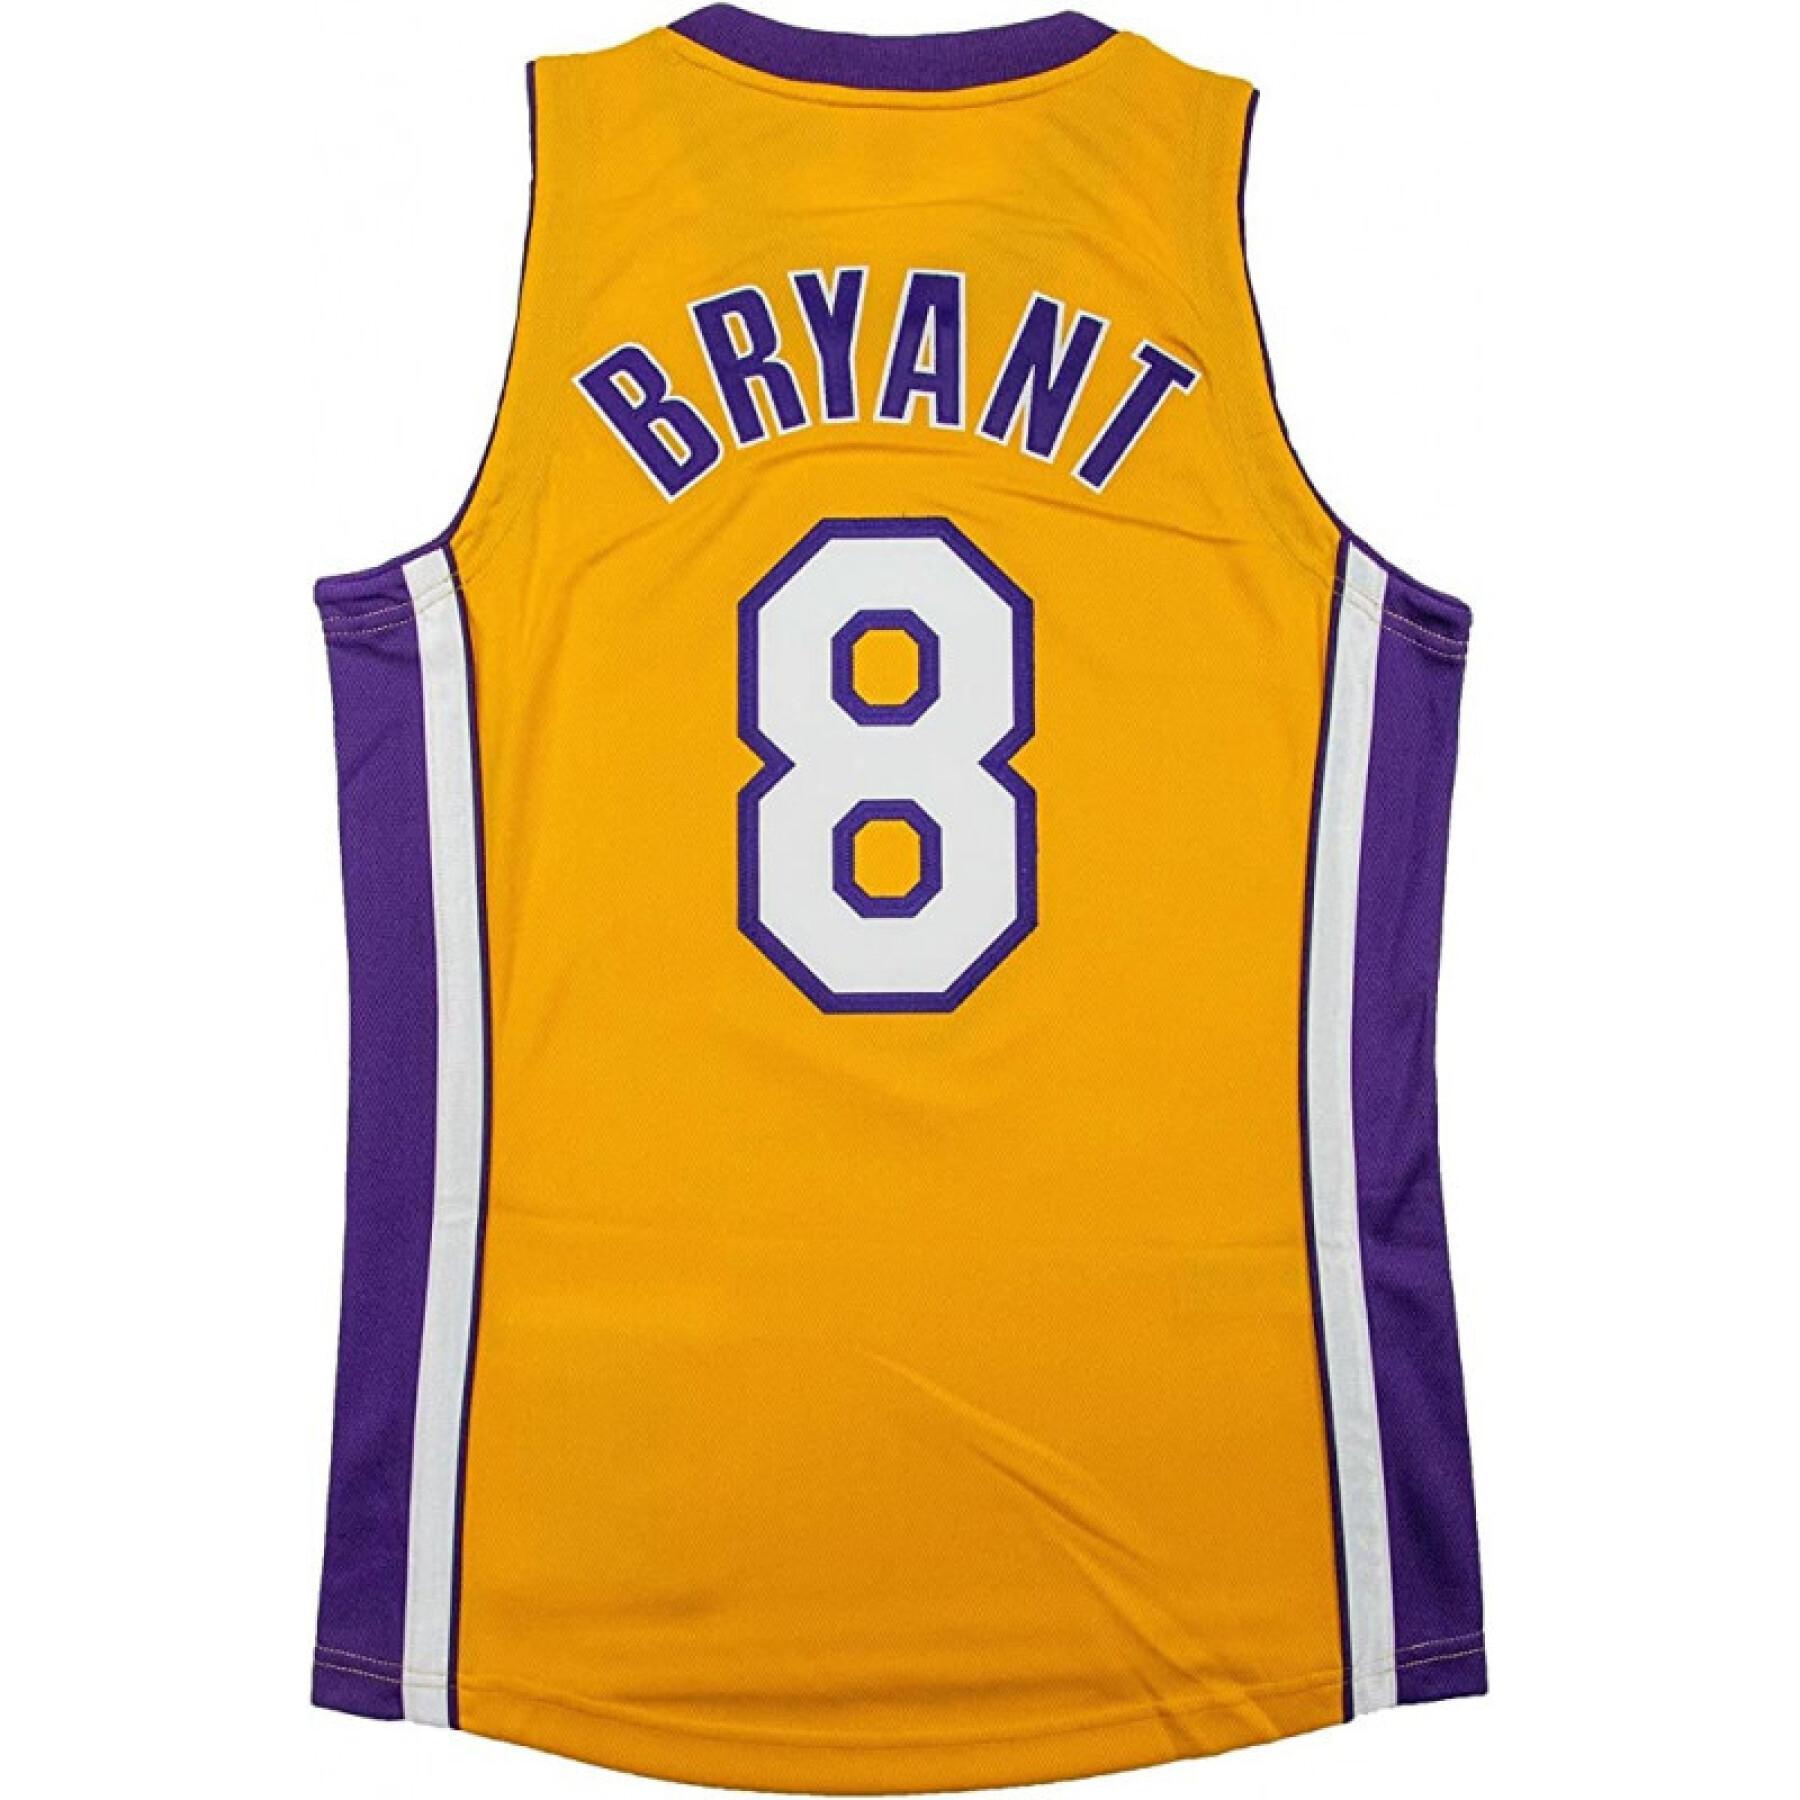 Maillot Los Angeles Lakers NBA Authentic 2001 Kobe Bryant